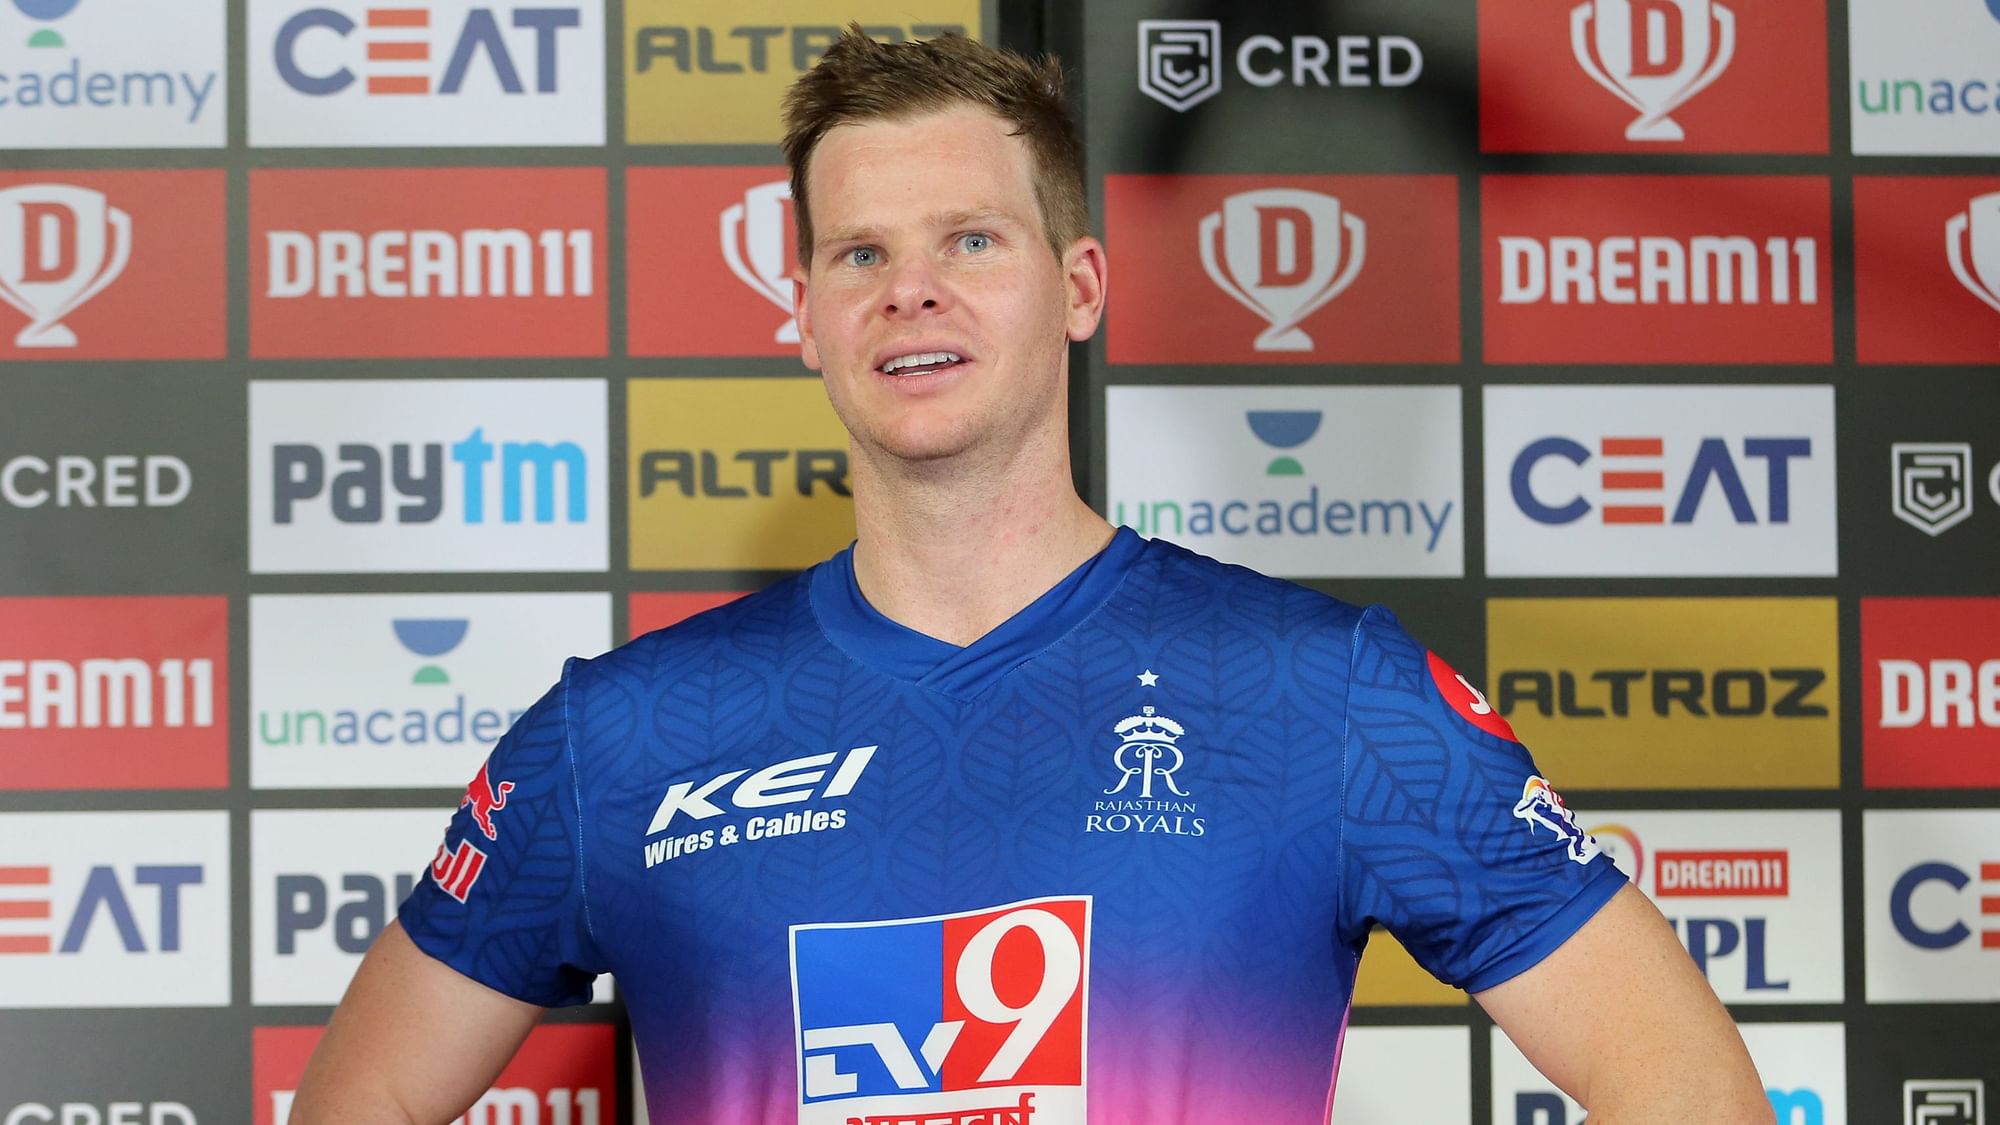 Rajasthan Royals skipper Steve Smith was all smiles after his team pulled off a record chase to beat Kings XI Punjab by four wickets.